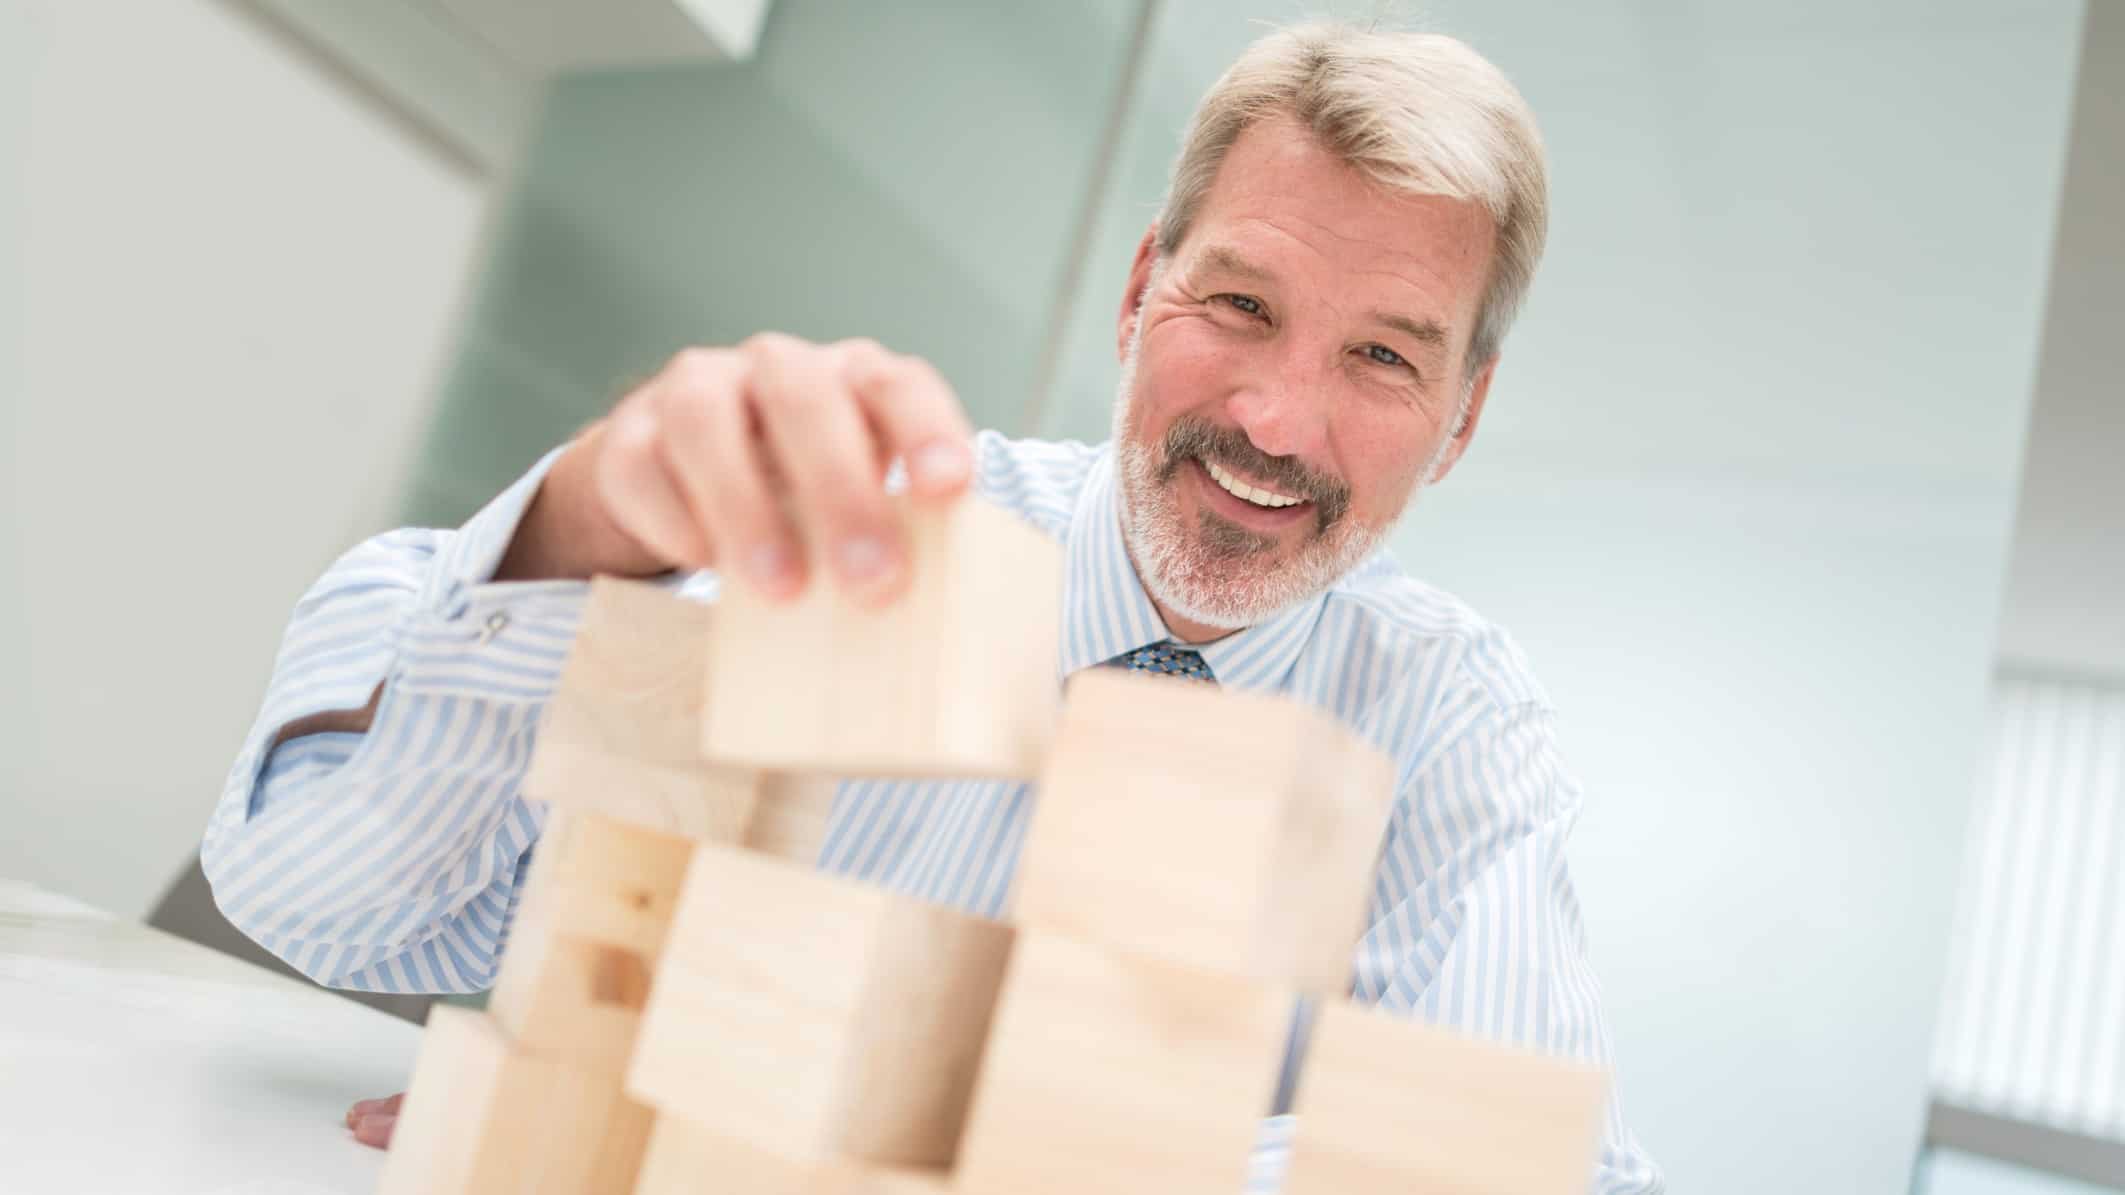 A businessman stacks building blocks while smiling about the anticipated 7% dividend yield that CSR is expected to pay based on its current share price